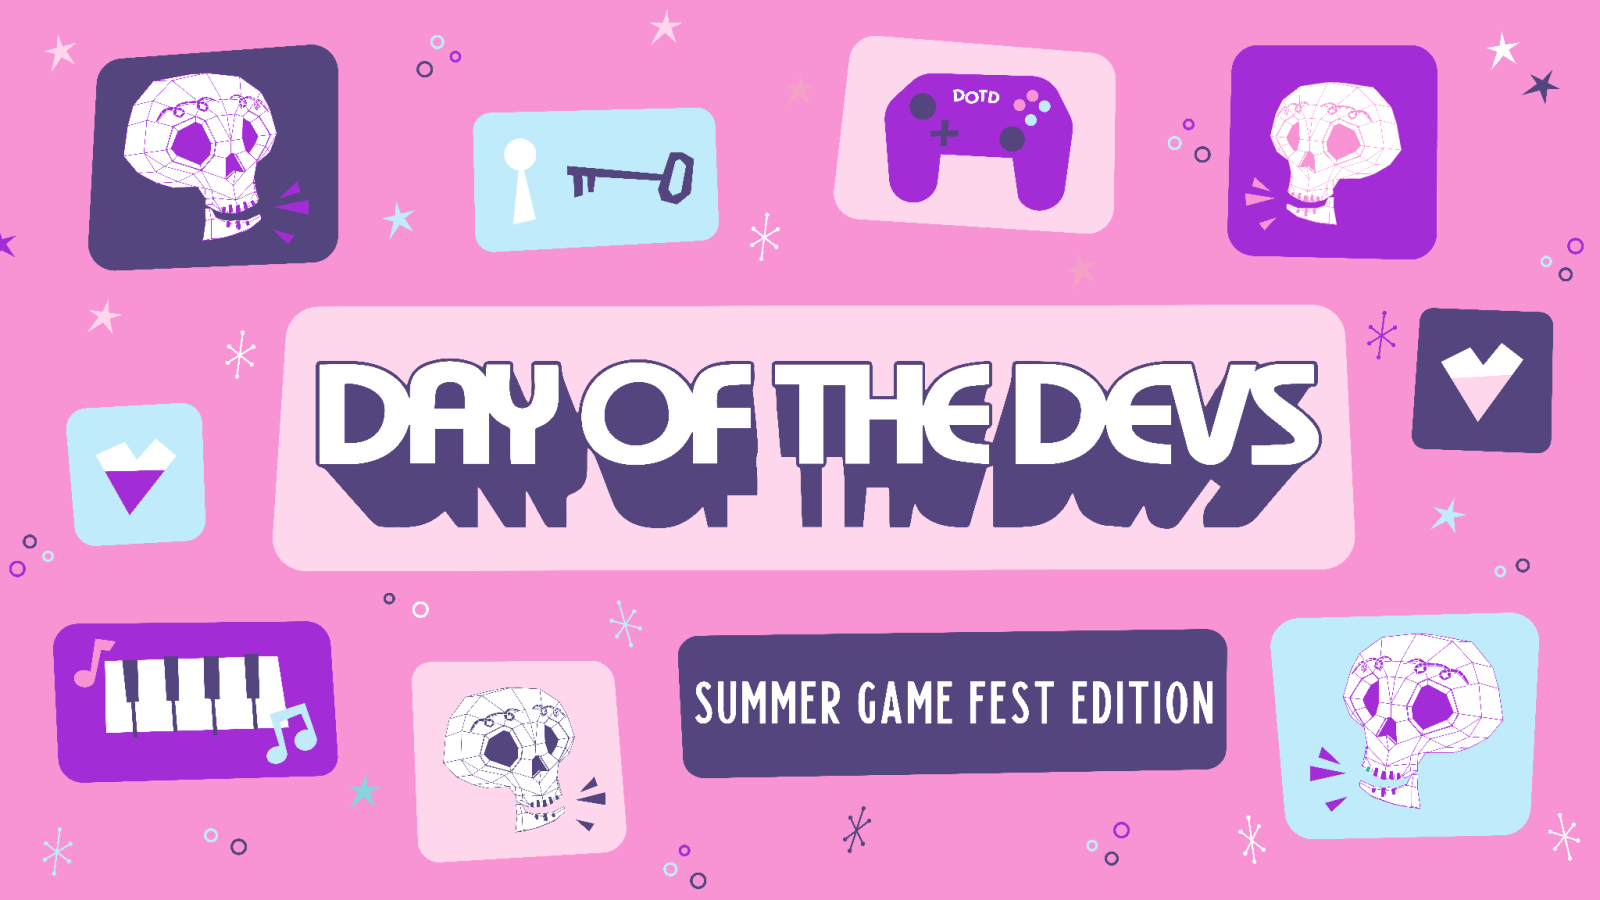 Day of the Devs returns to Summer Game Fest with fantastic list of partners